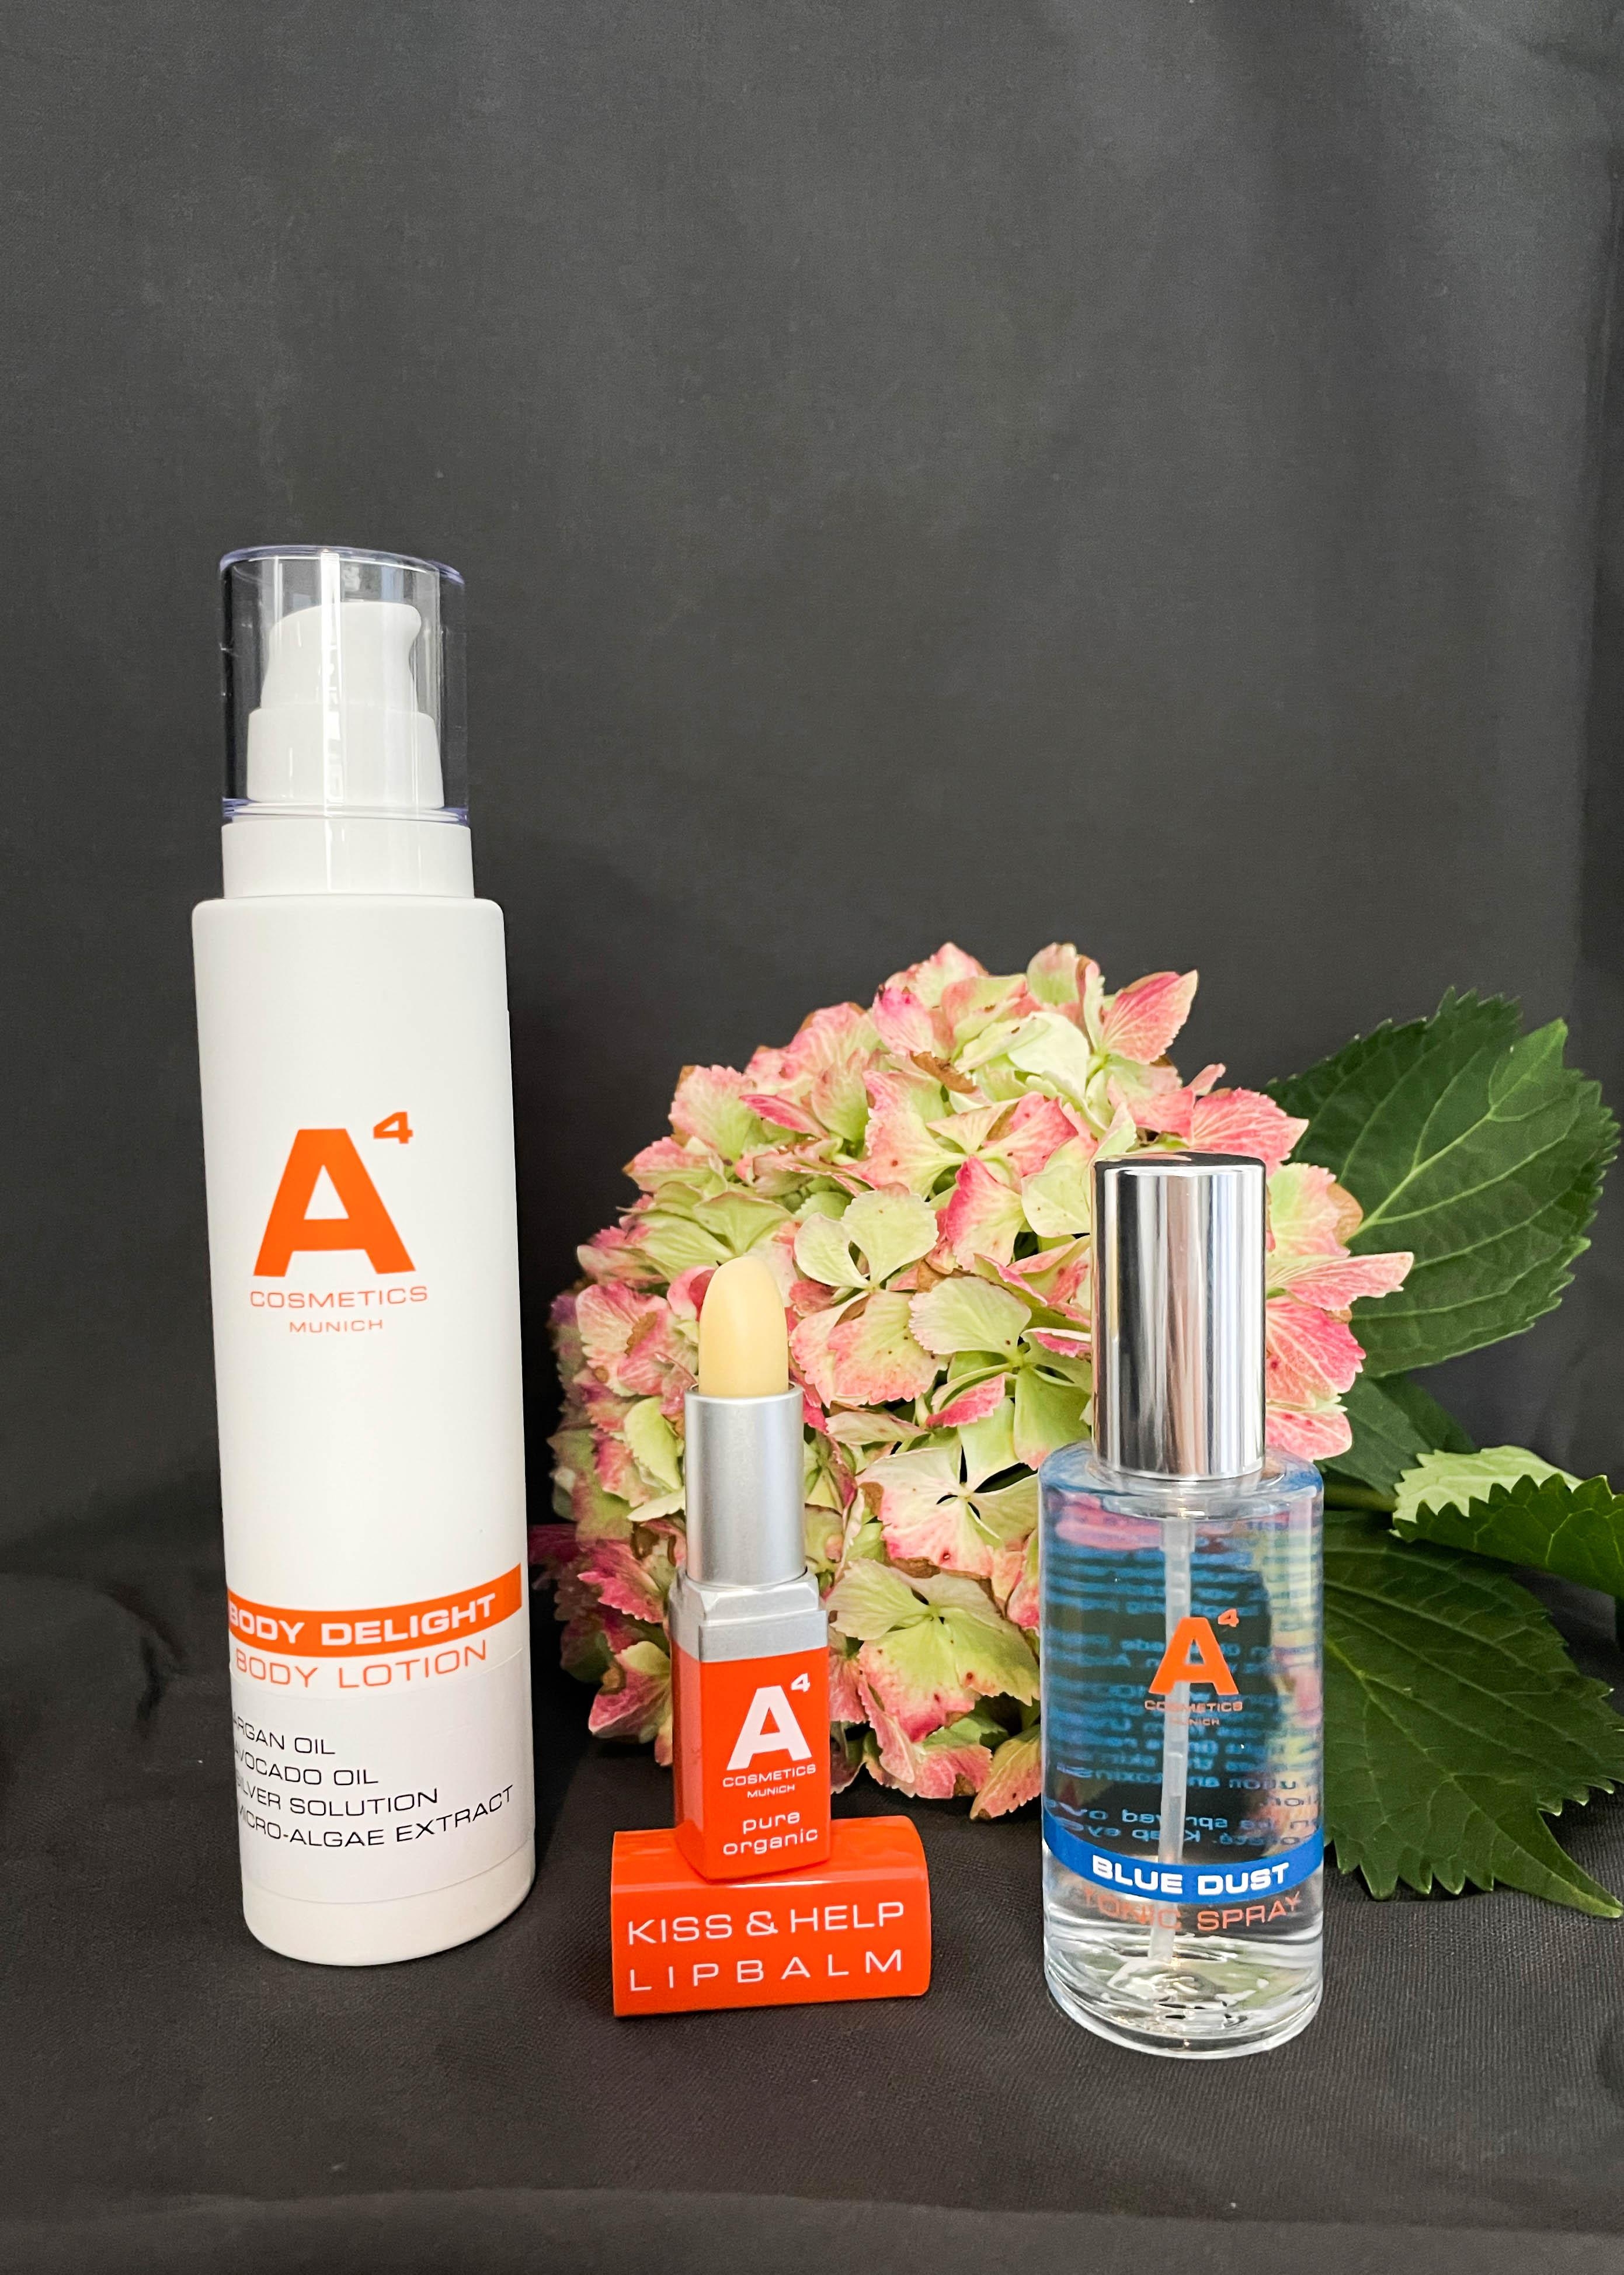 Must haves bei #a4cosmetics? Kiss&Help Lip Balm, Body Delight Body Lotion & Blue Dust Tonic Spray ⬇️ #Beautyinsider